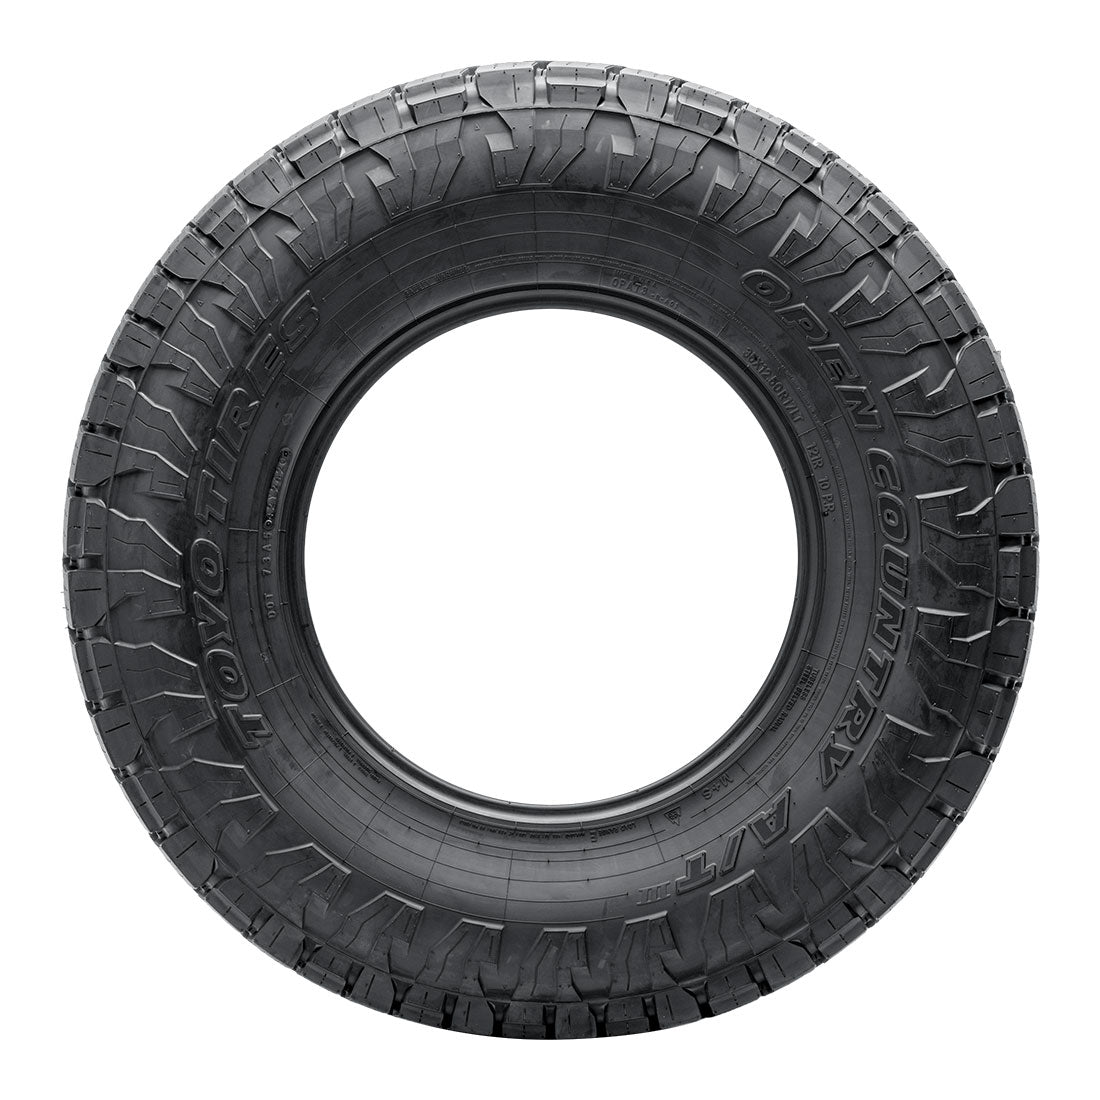 Open Country A/TIII 275/65R20 (34.1 x 11)